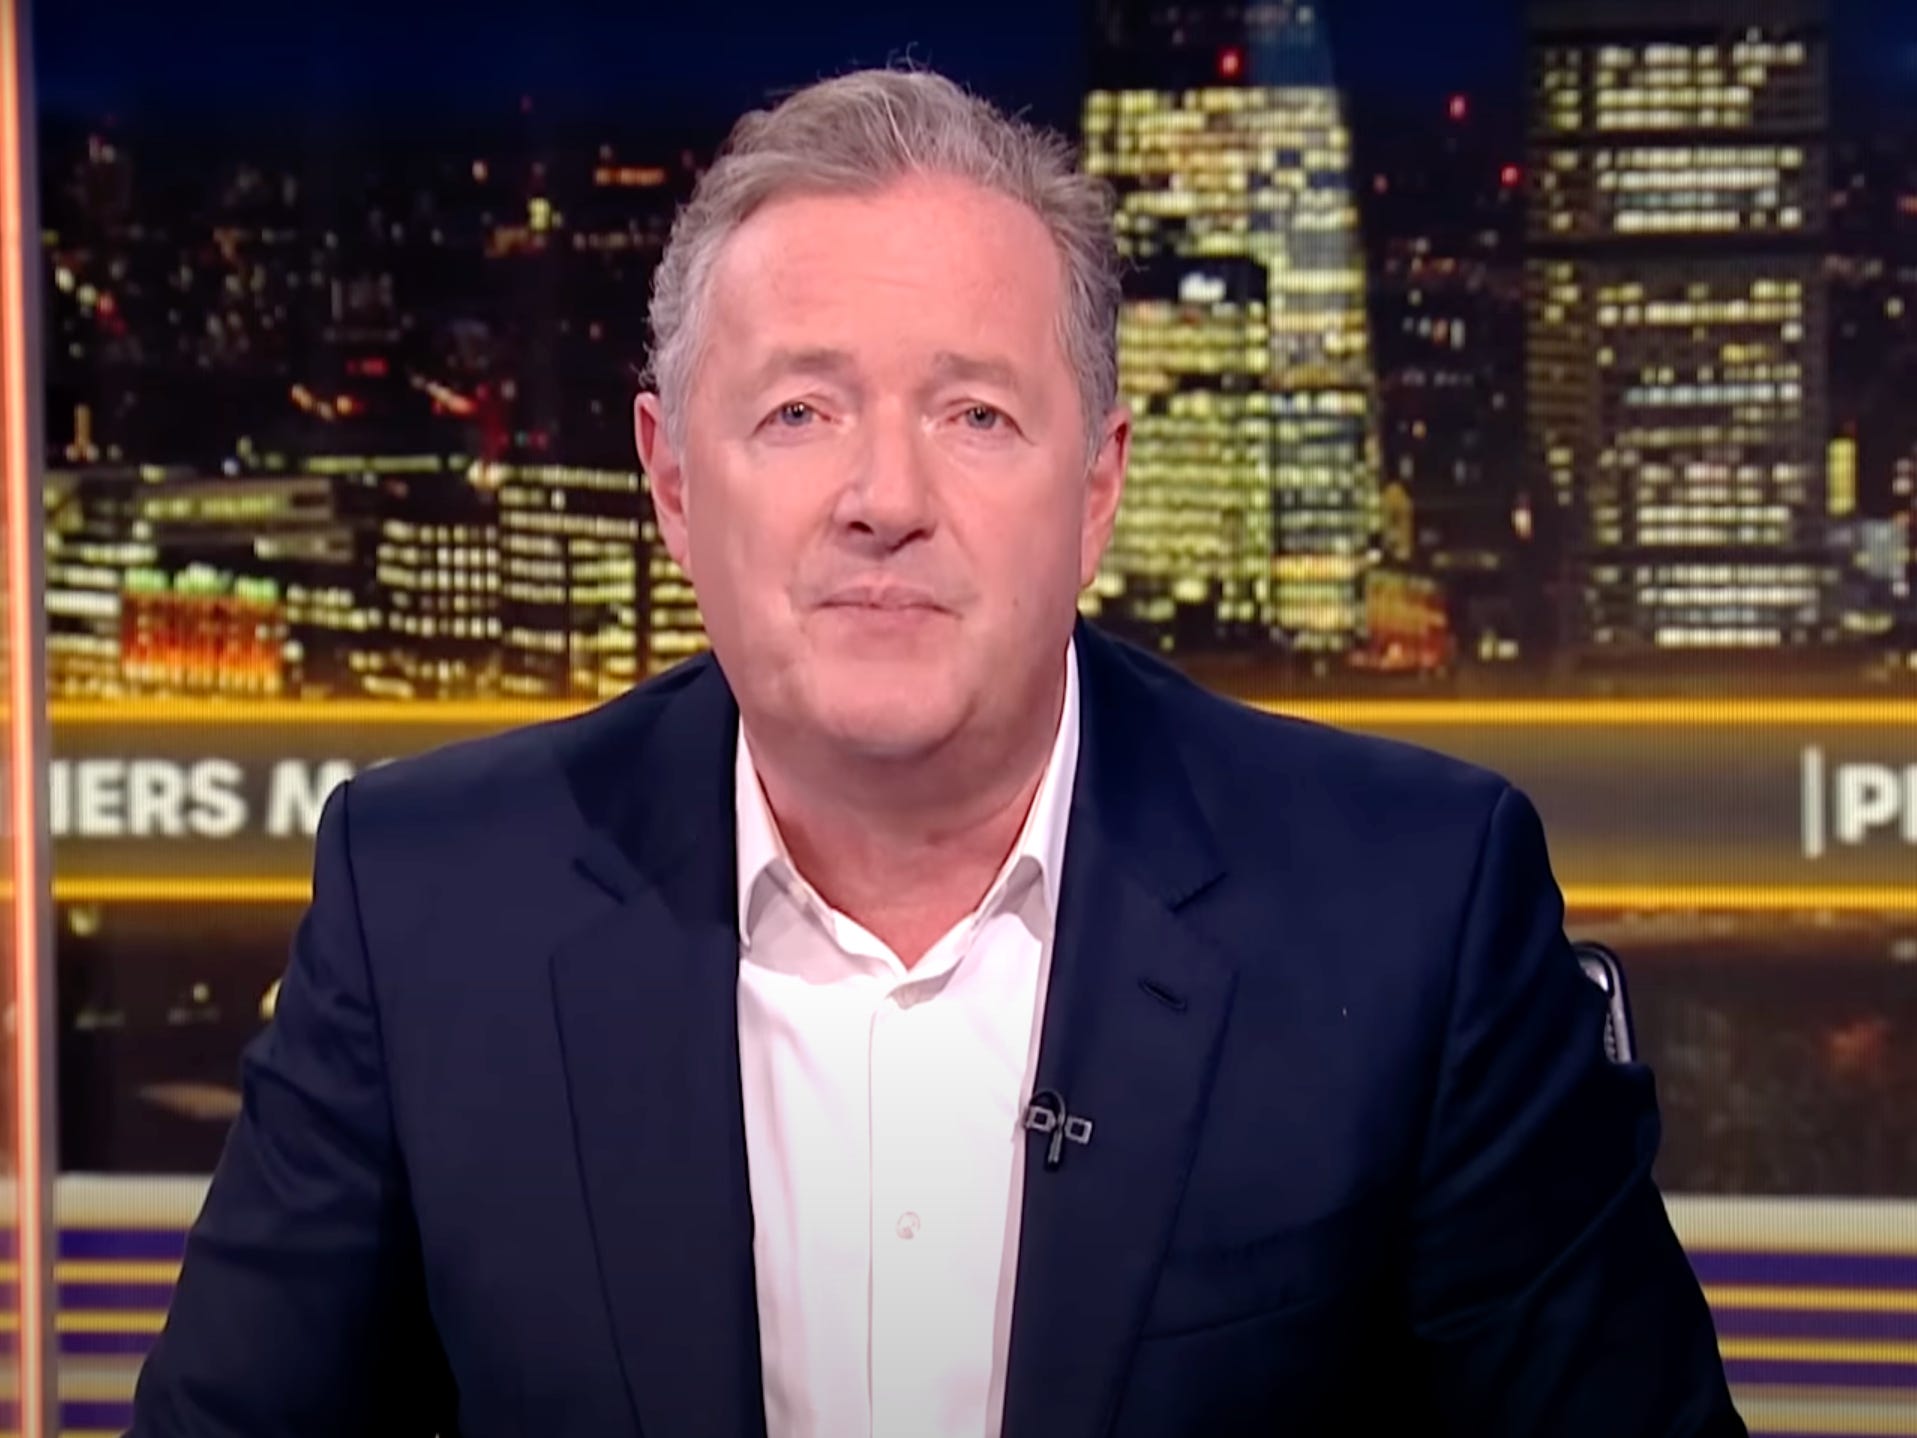 <p>Before the episode of "Piers Morgan Uncensored" dropped on Thursday, Harvey spoke to Scottish newspaper, the <a href="https://www.dailyrecord.co.uk/news/scottish-news/baby-reindeers-real-life-martha-32762707">Daily Record</a> about the interview.</p><p>She claimed that Morgan only paid her £250 for her appearance, and said that he "used" her.</p><p>"I have my own thoughts on it that I'd like to keep to myself but I wouldn't say I was happy. It was very rapid to try to trip me up," Harvey said. "He did it fast paced to catch me off guard."</p><p>Morgan's representatives did not immediately respond to Business Insider's requests for comment.</p>